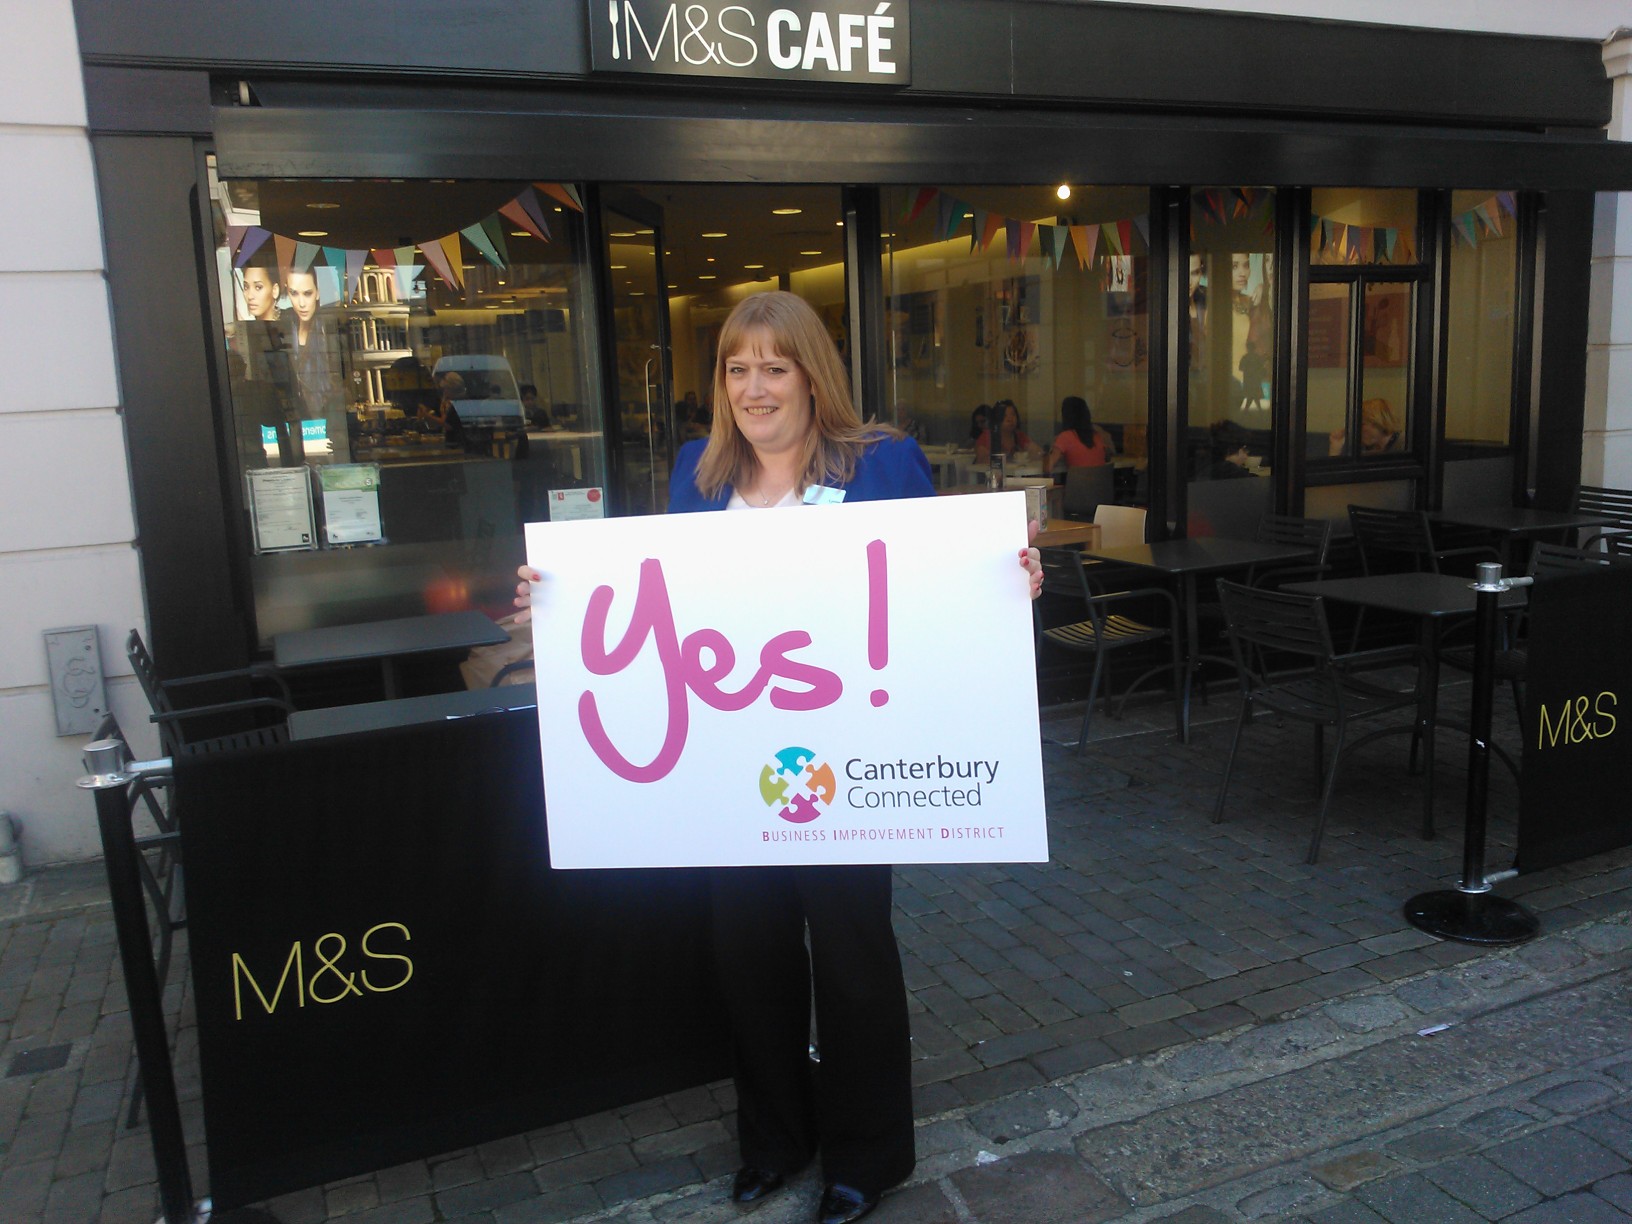 A woman outside M&S Cafe holding a sign that says Yes! Canterbury Connected BID